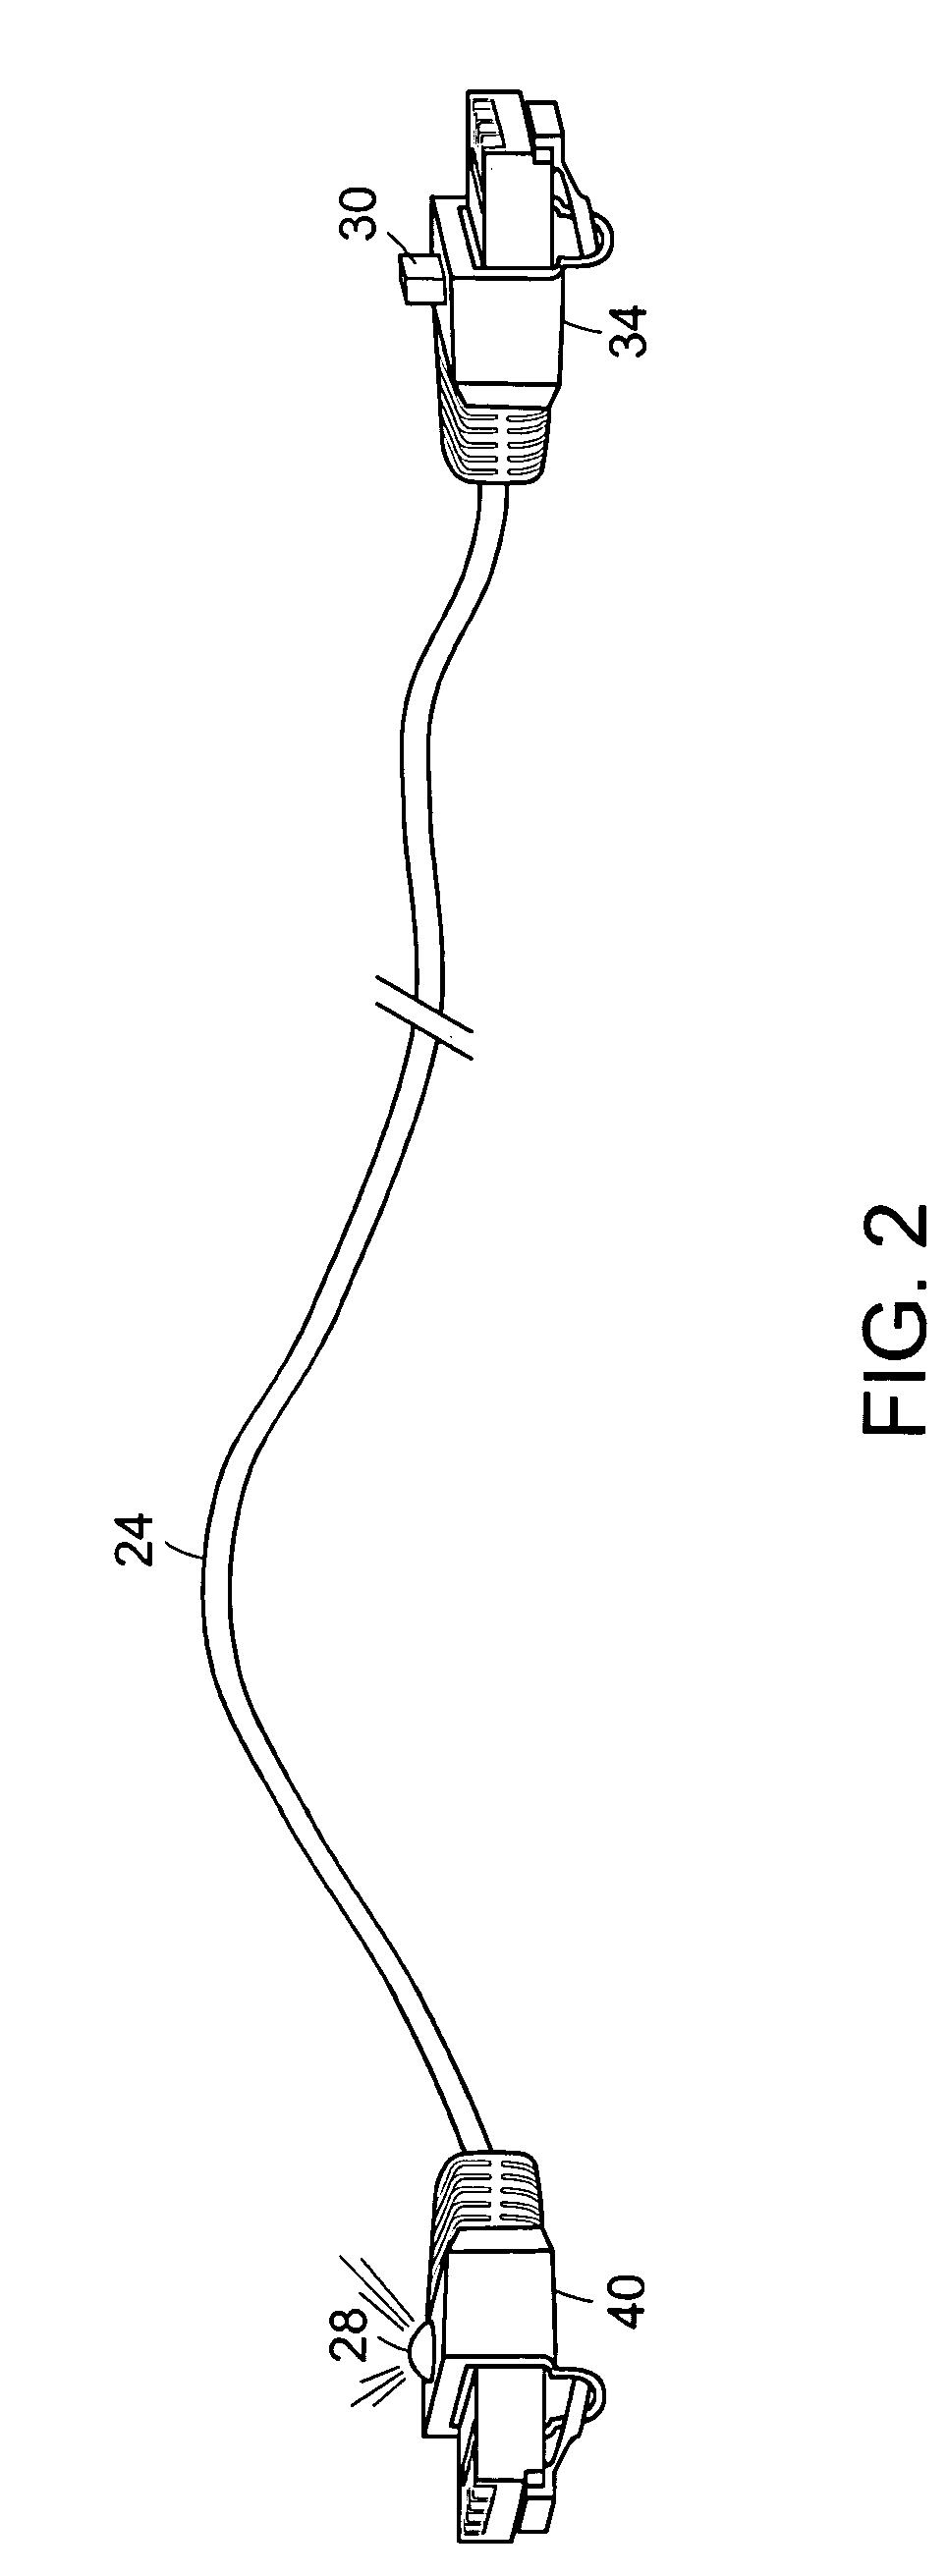 Self-identifying cable for interconnecting electronic devices